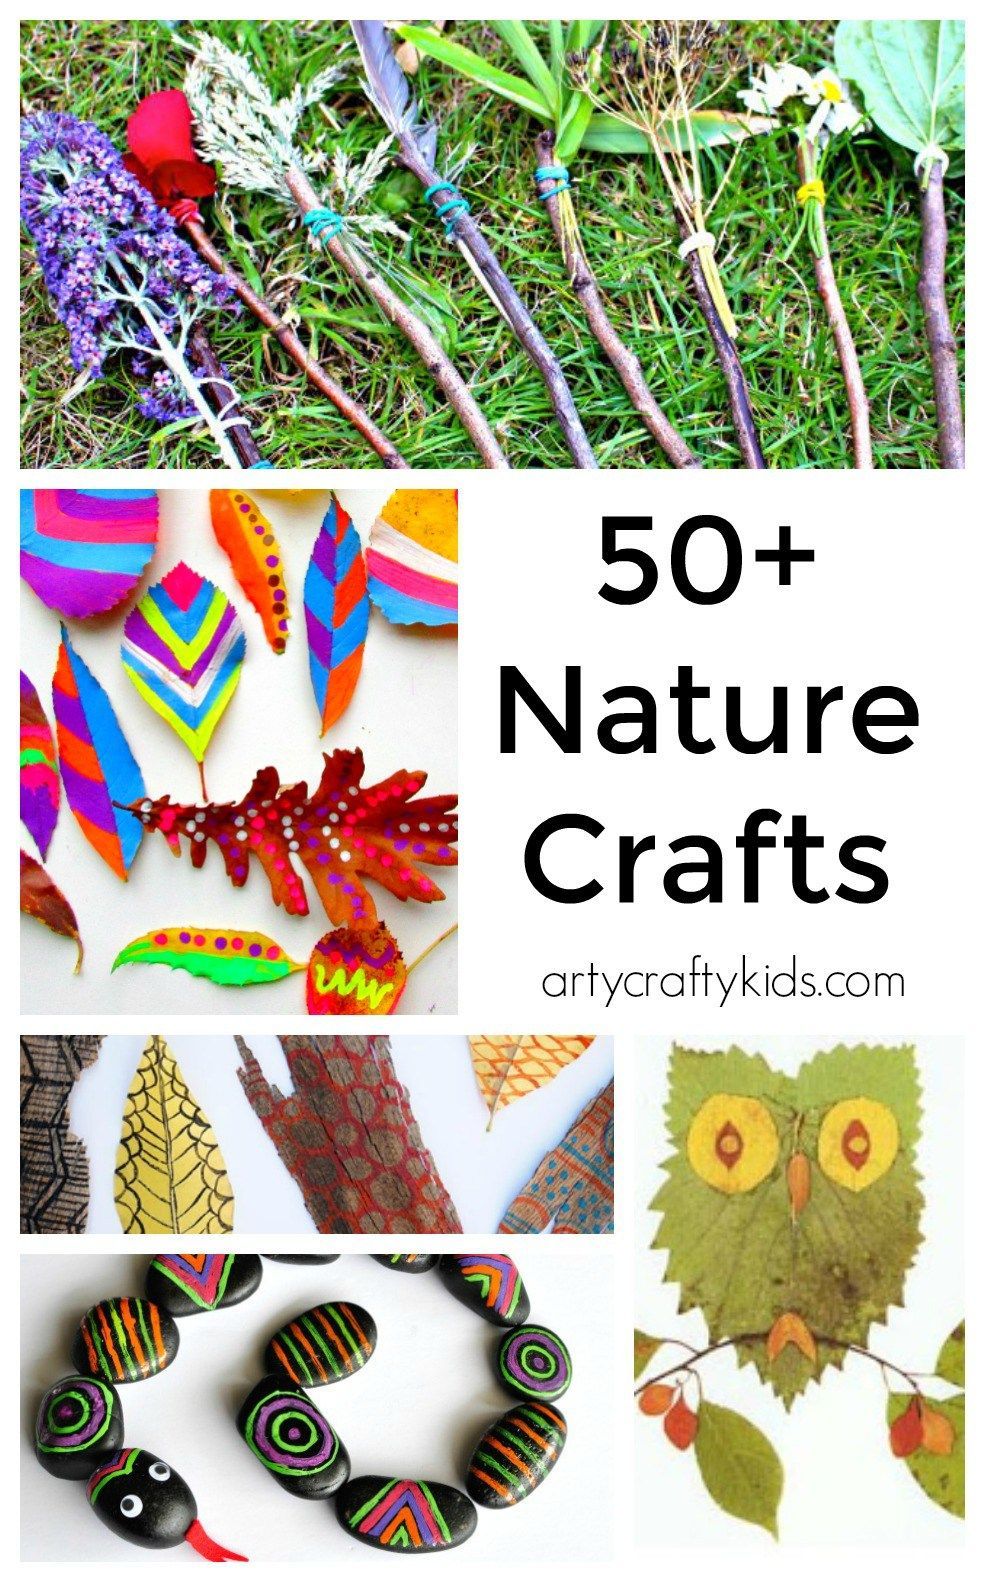 50 Nature Crafts for Kids -   18 school crafts show
 ideas